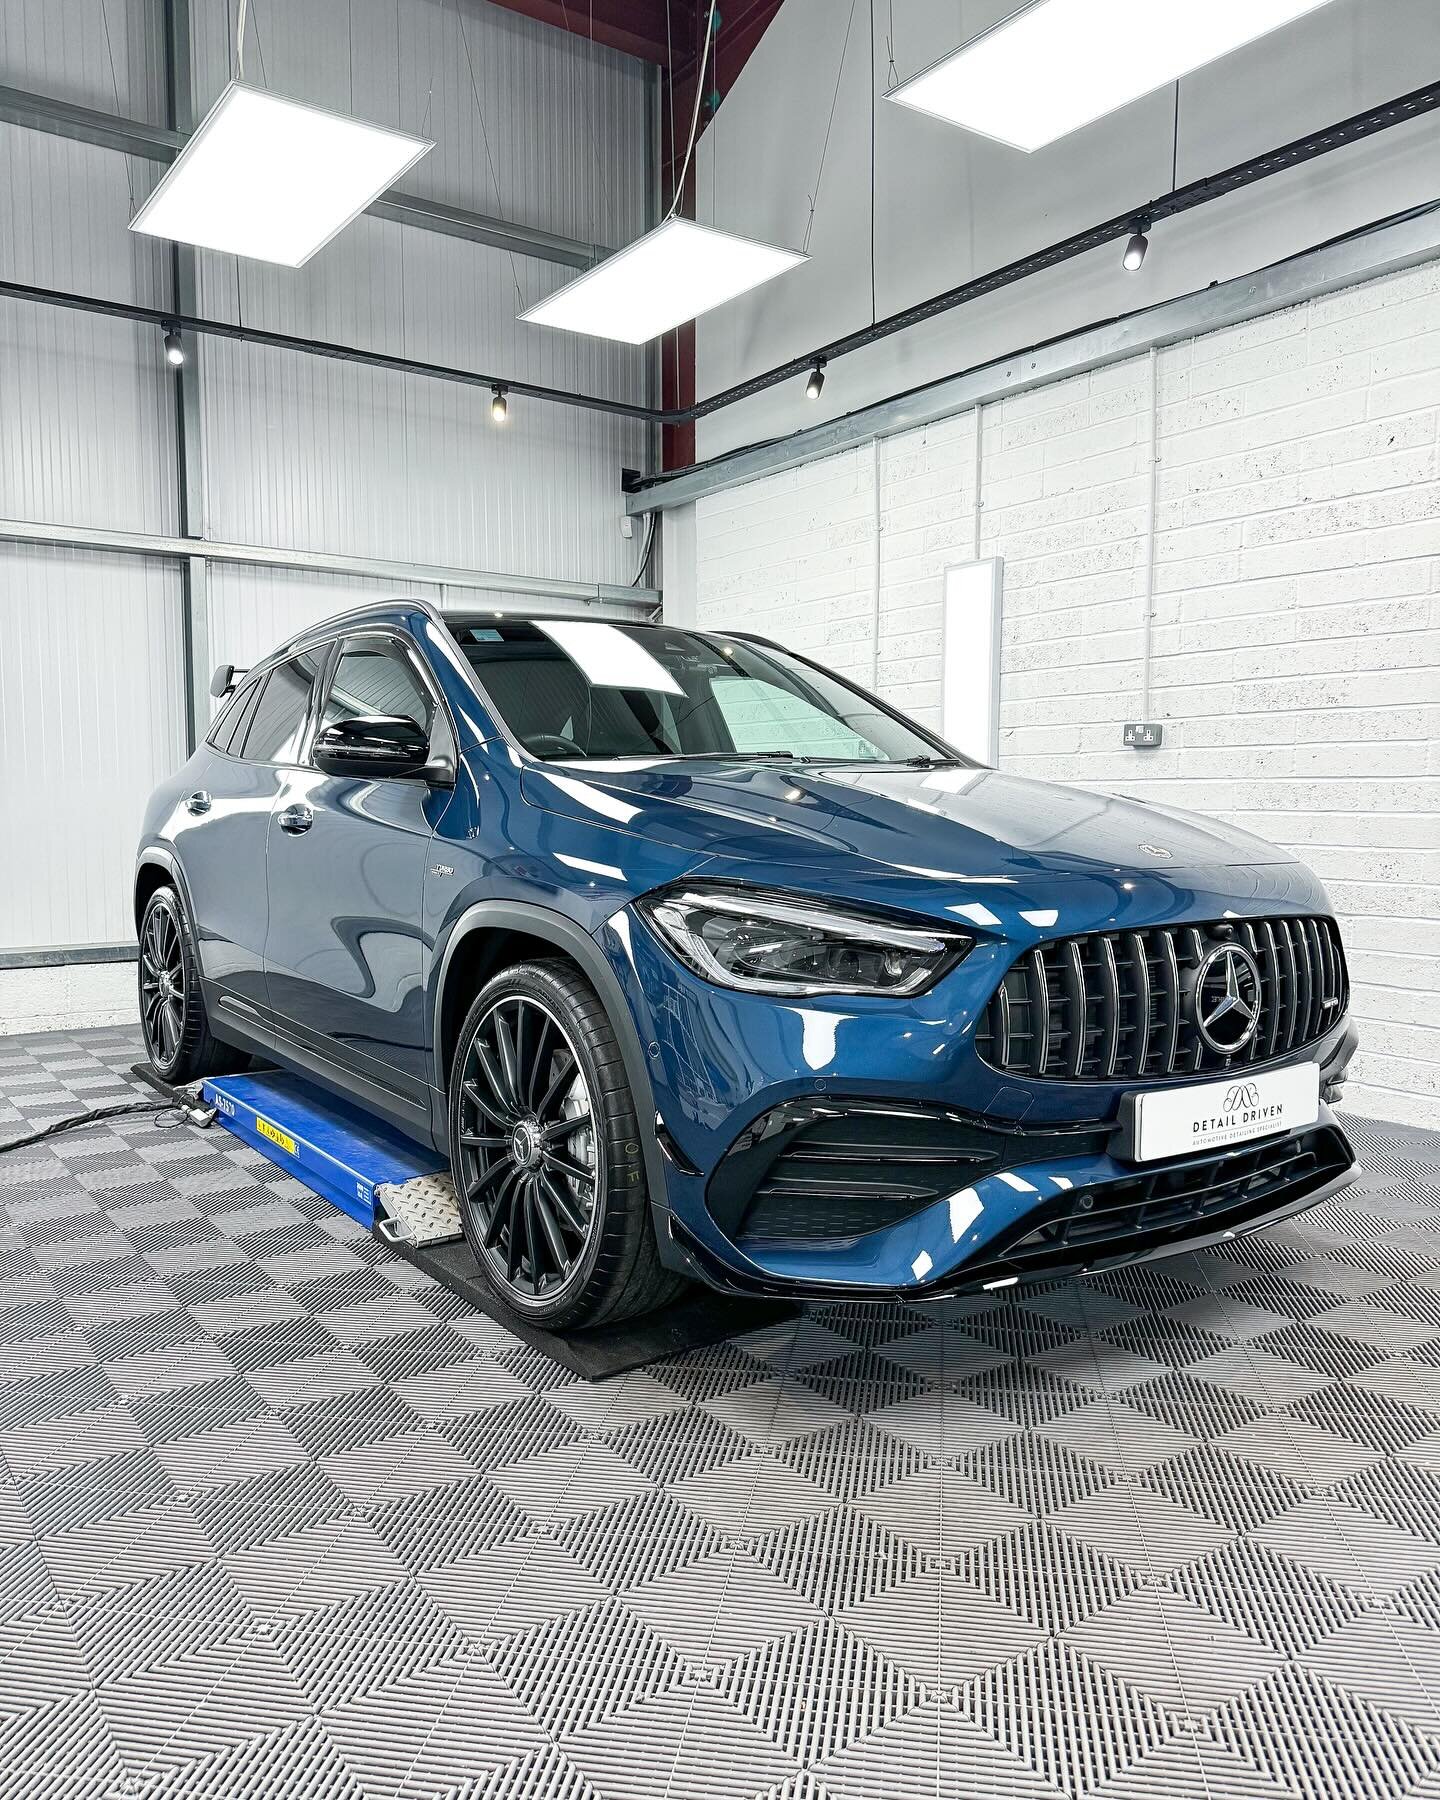 Mercedes GLA 35 AMG after our full install of Suntek Reaction Paint Protection Film including Windscreen PPF. Denim blue paintwork full protected against stone chips, physical damage and paintwork deterioration. 

#mercedes #mercedesgla #mercedesgla3